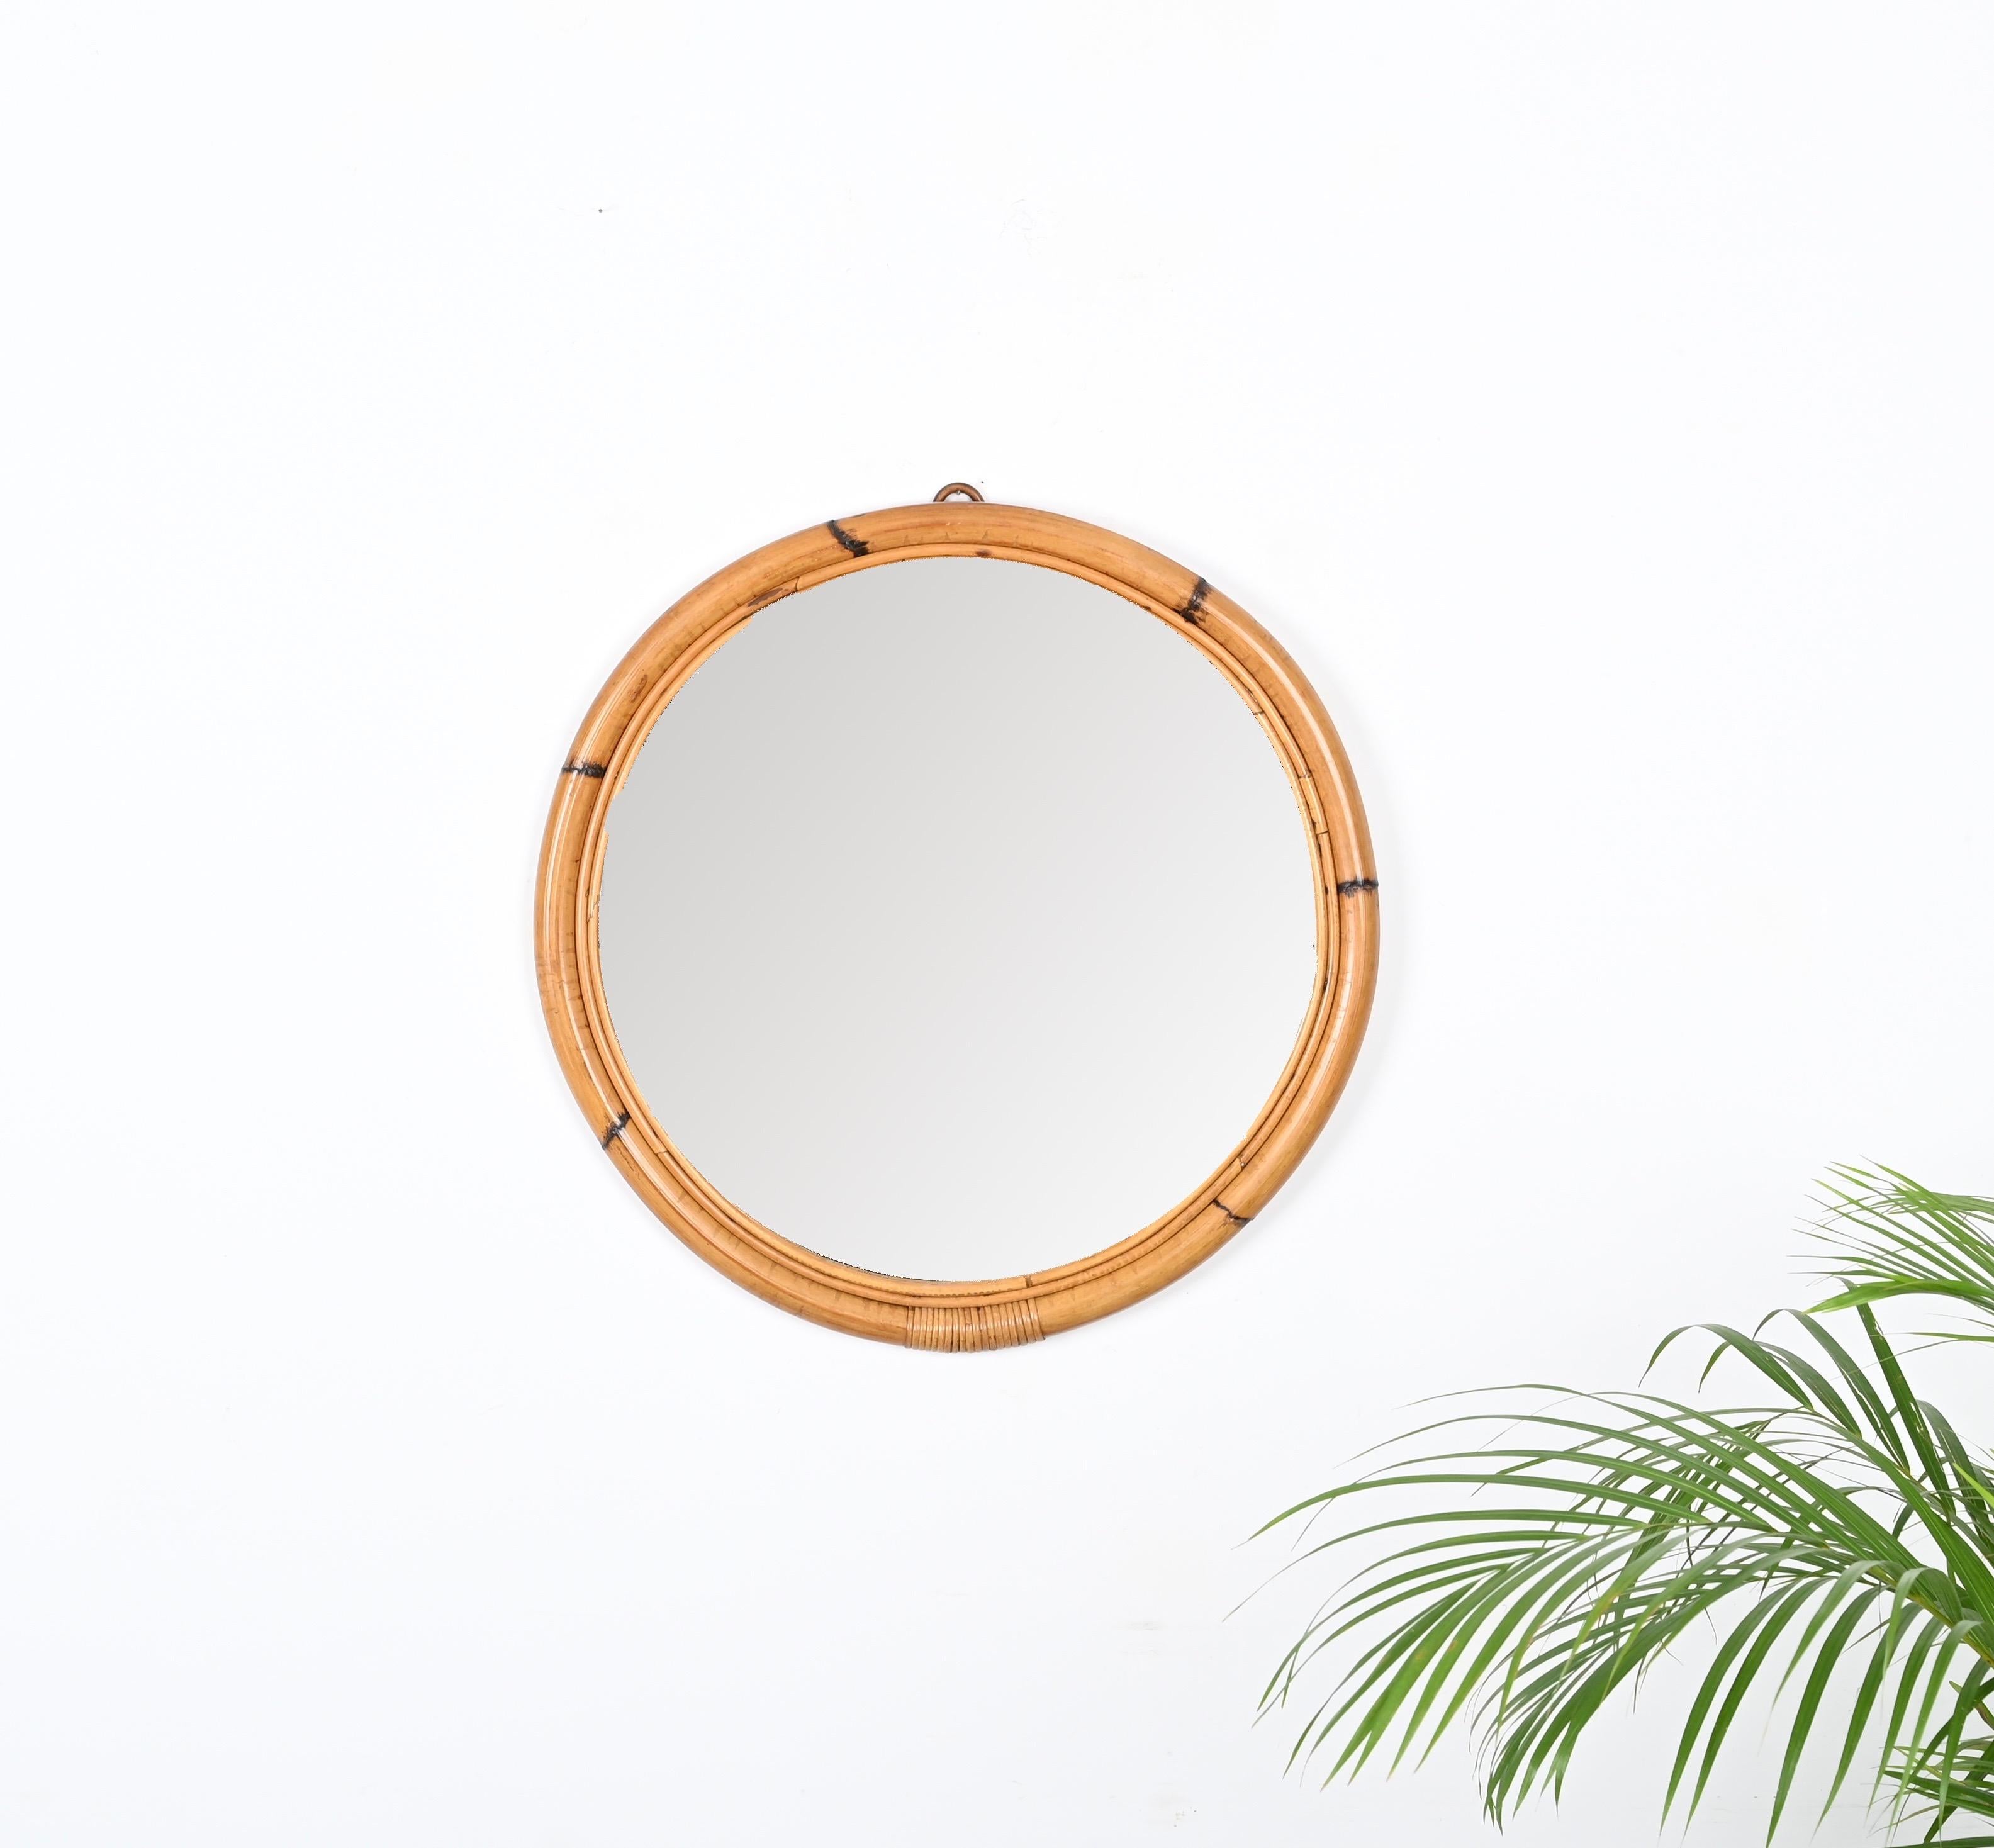 Wonderful mid-century round mirror with double bamboo cane frame. This fantastic item was produced in Italy in the 1970s.

The mirror features a double round frame, the external one in curved bamboo and the inside one in curved rattan. The mirror is